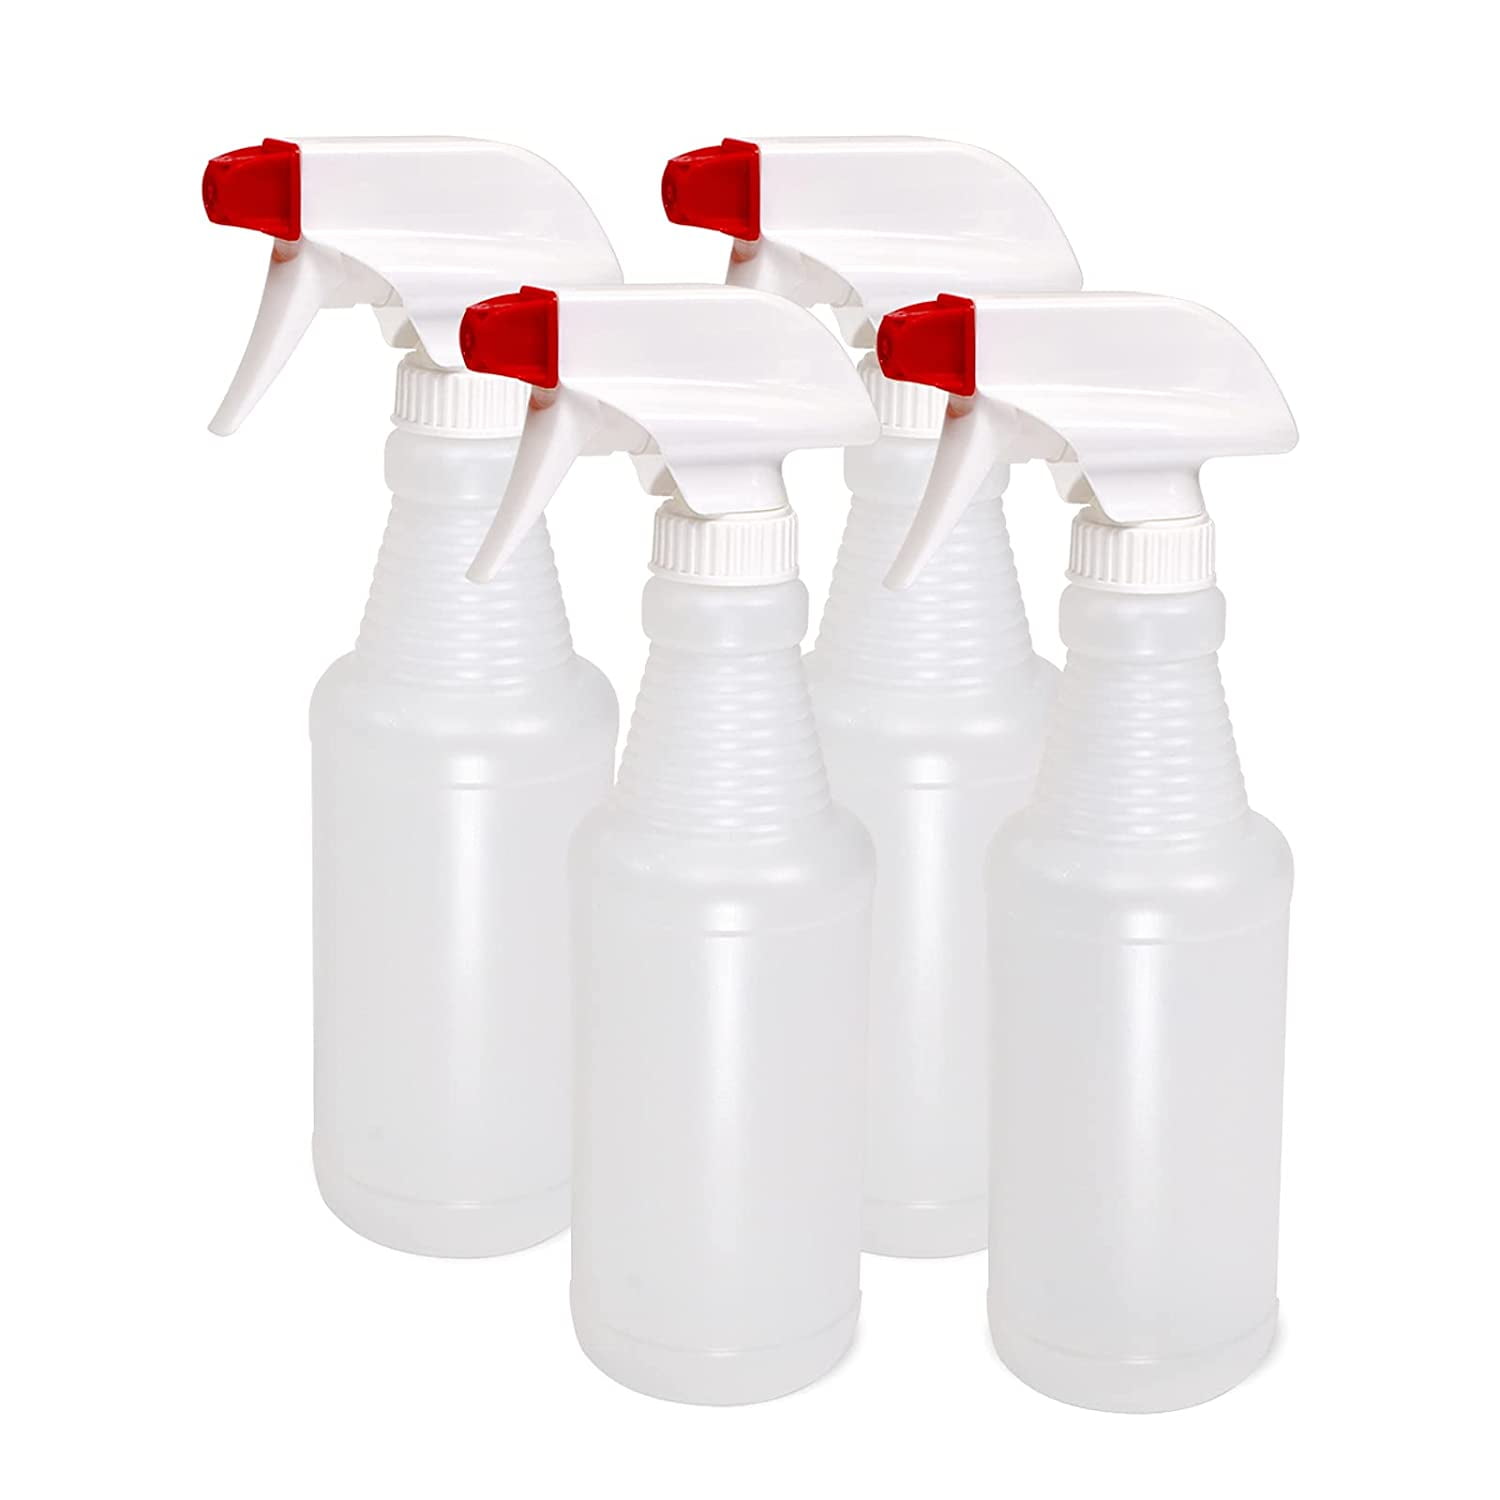  Uineko Plastic Spray Bottle 2 Pack, 32 Oz, All-Purpose Heavy  Duty Spraying Bottles Sprayer Leak Proof Mist Empty Water Bottle for  Cleaning Solution Planting Pet with Adjustable Nozzle - Red 